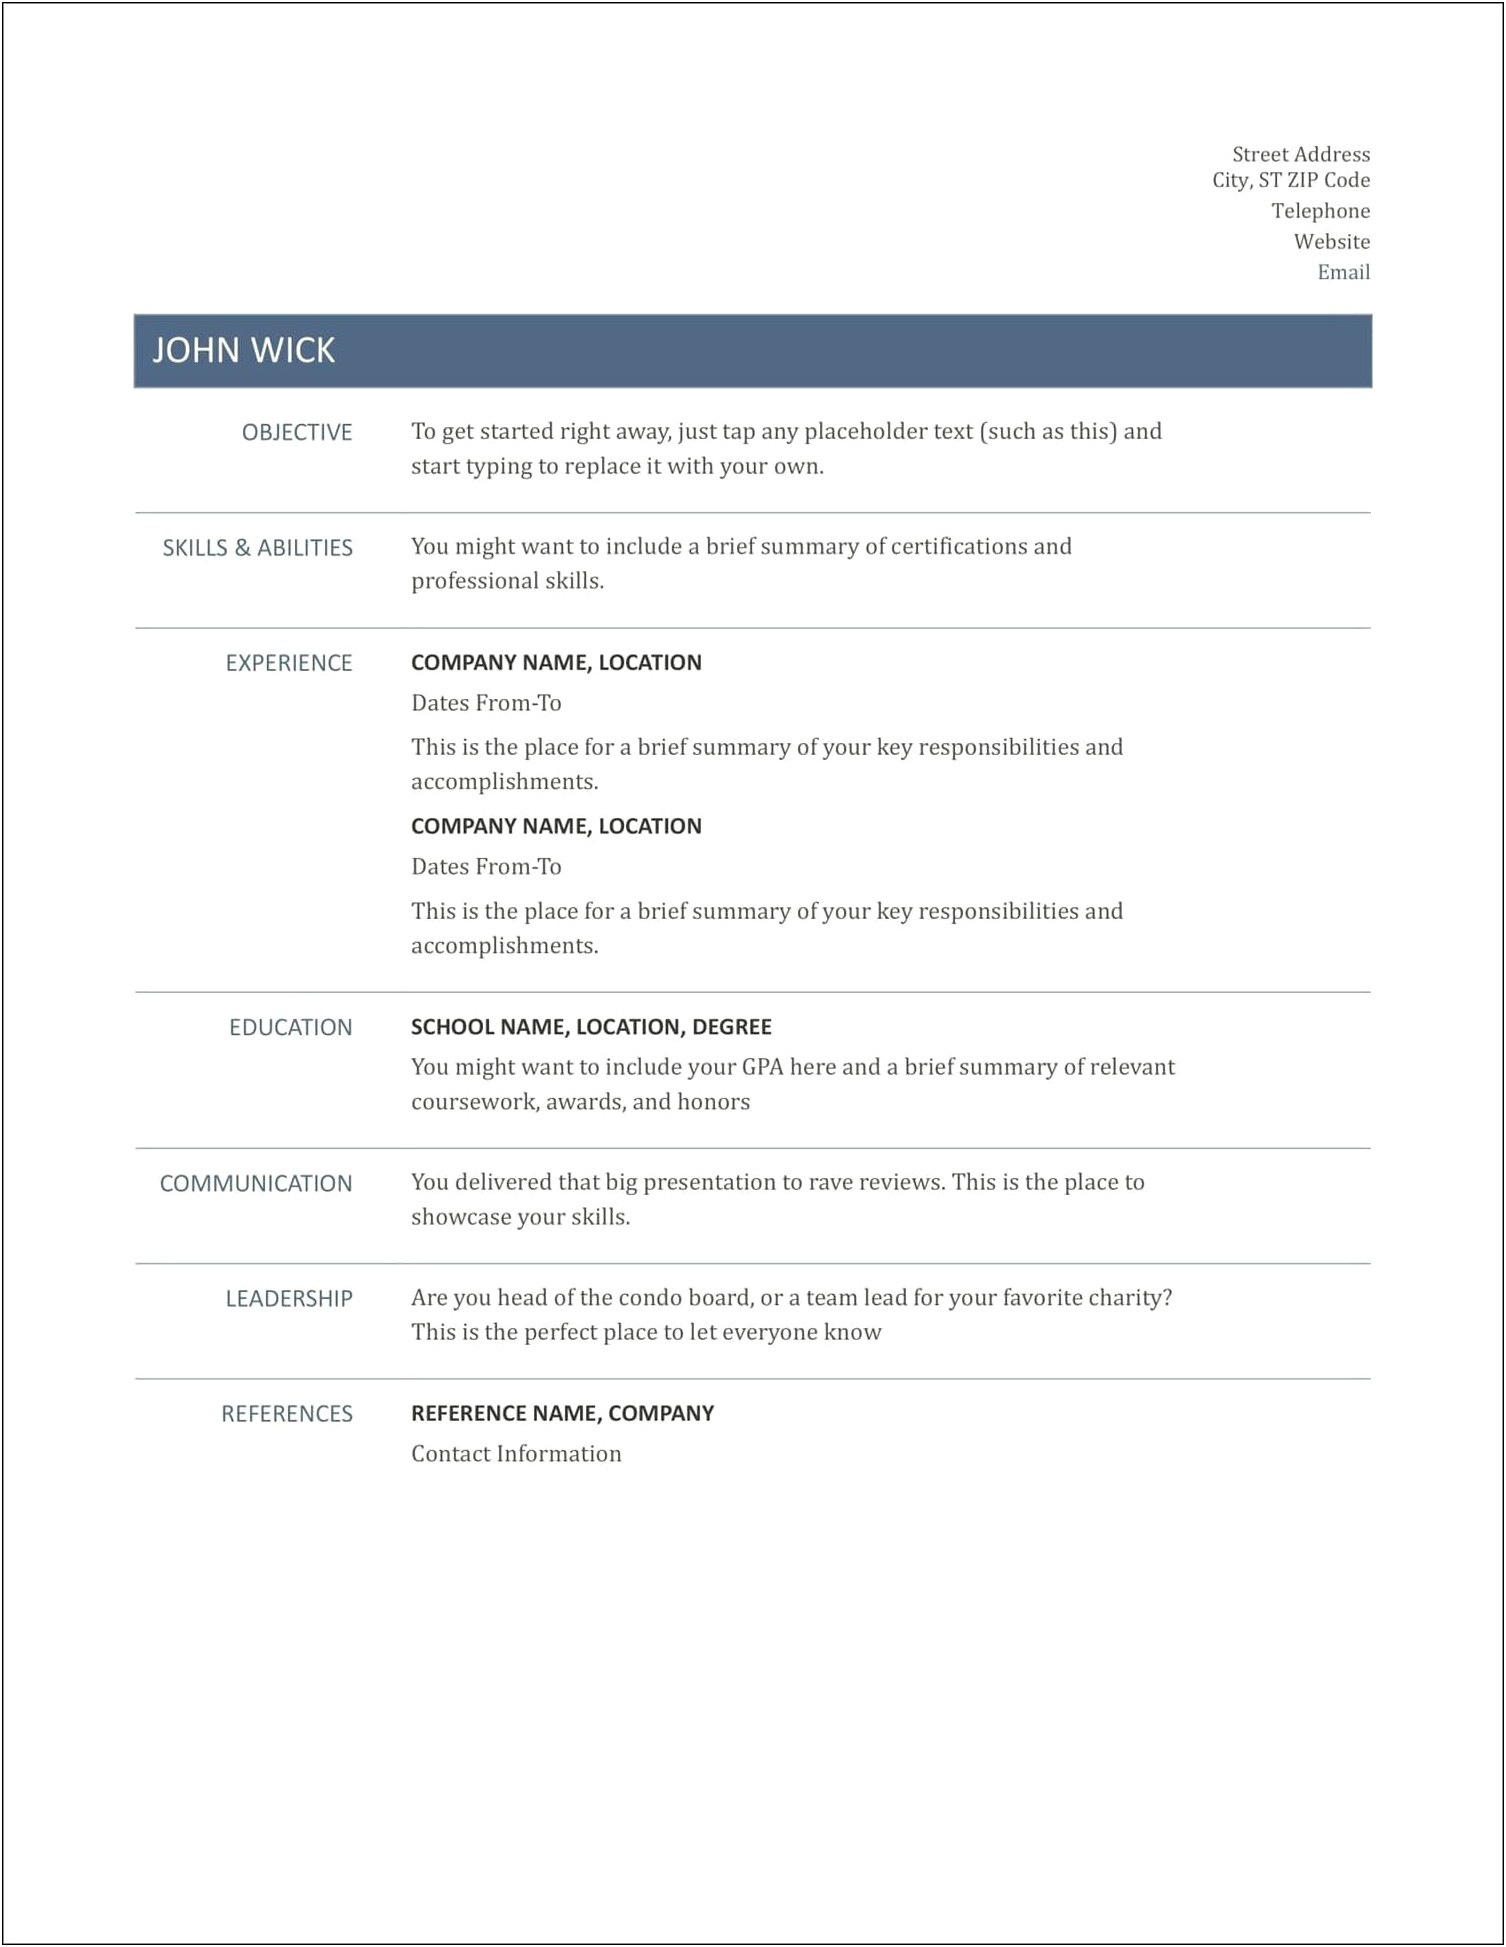 Free Resume Download No Charge